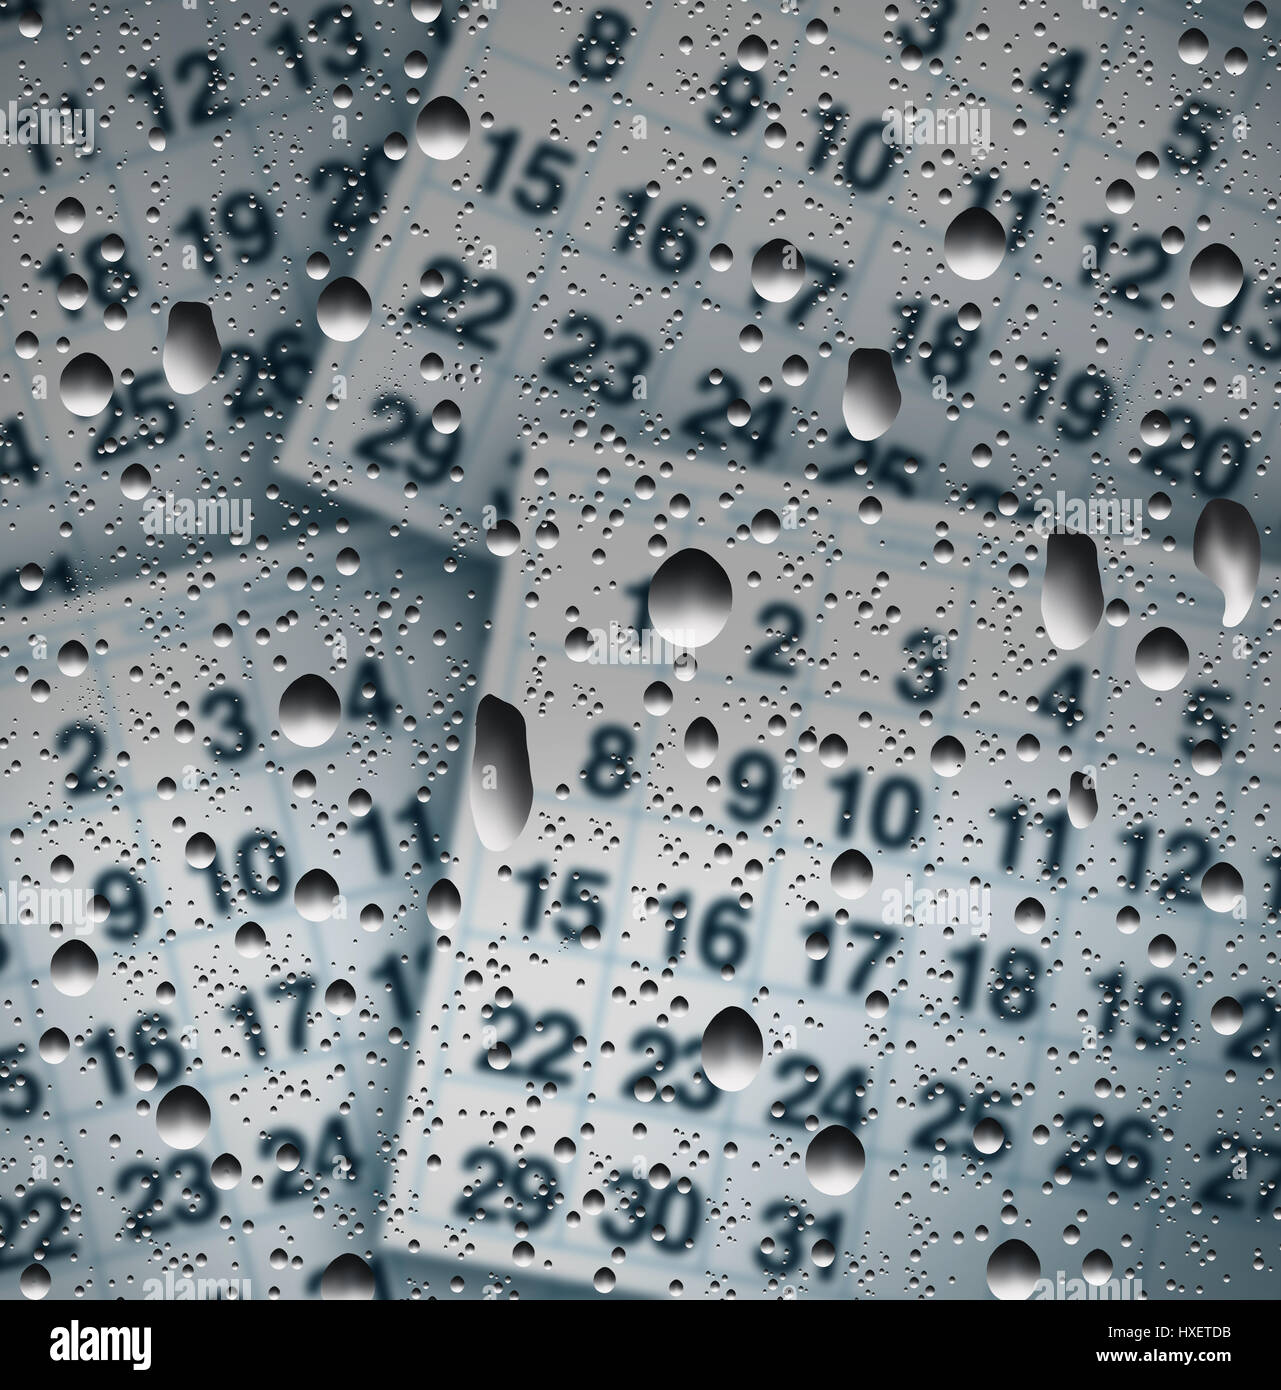 Rainy day schedule concept as a wet window with rain water drops on glass with calendar pages as a weather forecast or scheduling change. Stock Photo